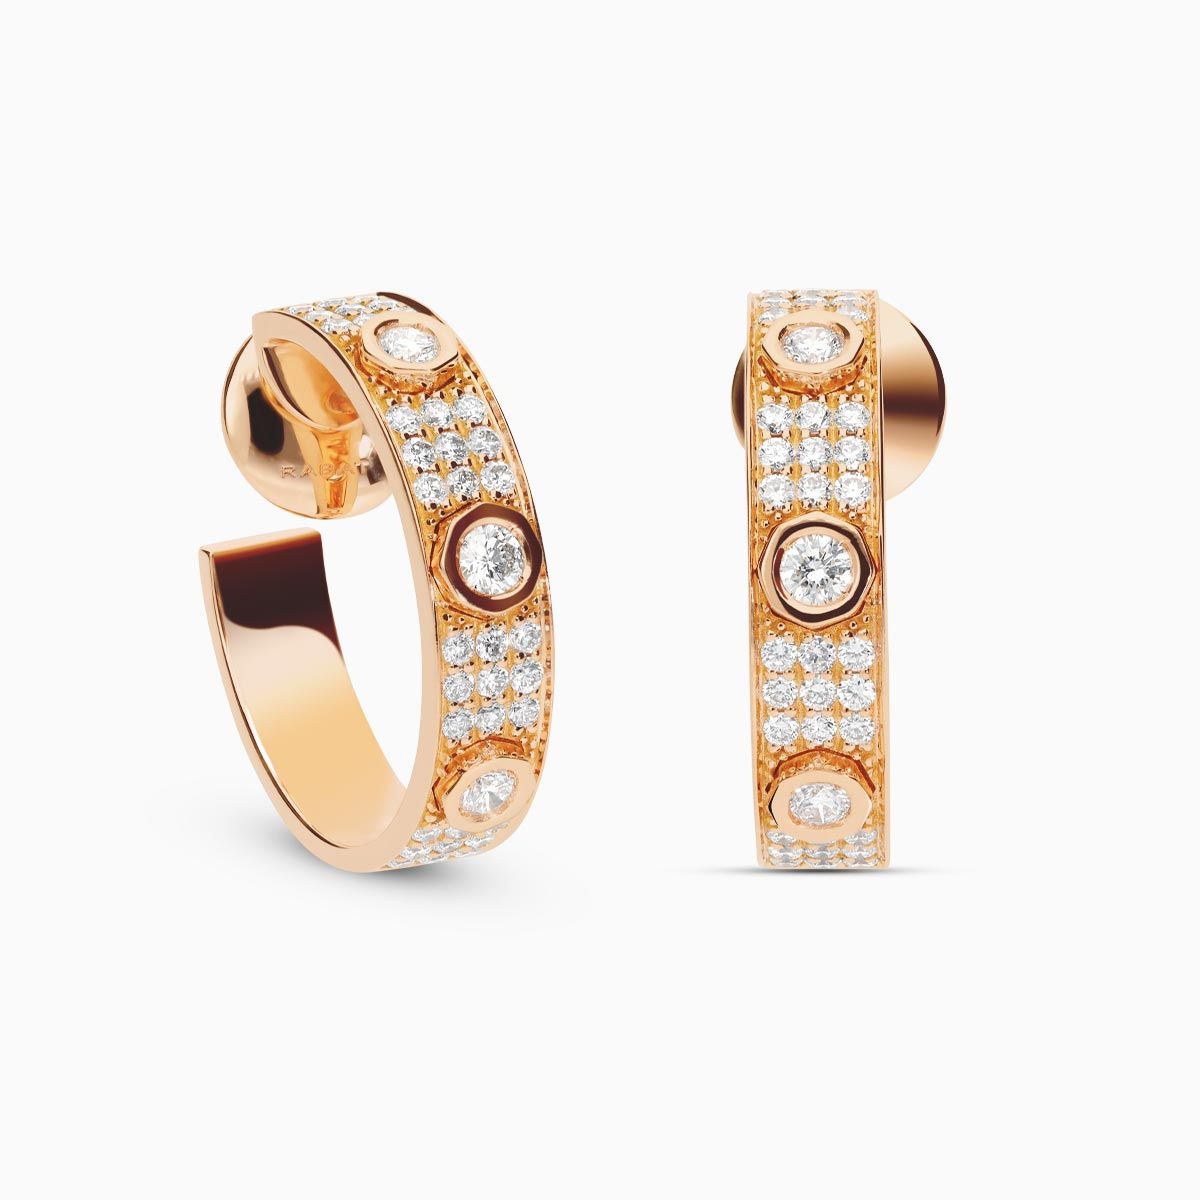 Small hoop earrings in rose gold with pavé diamonds